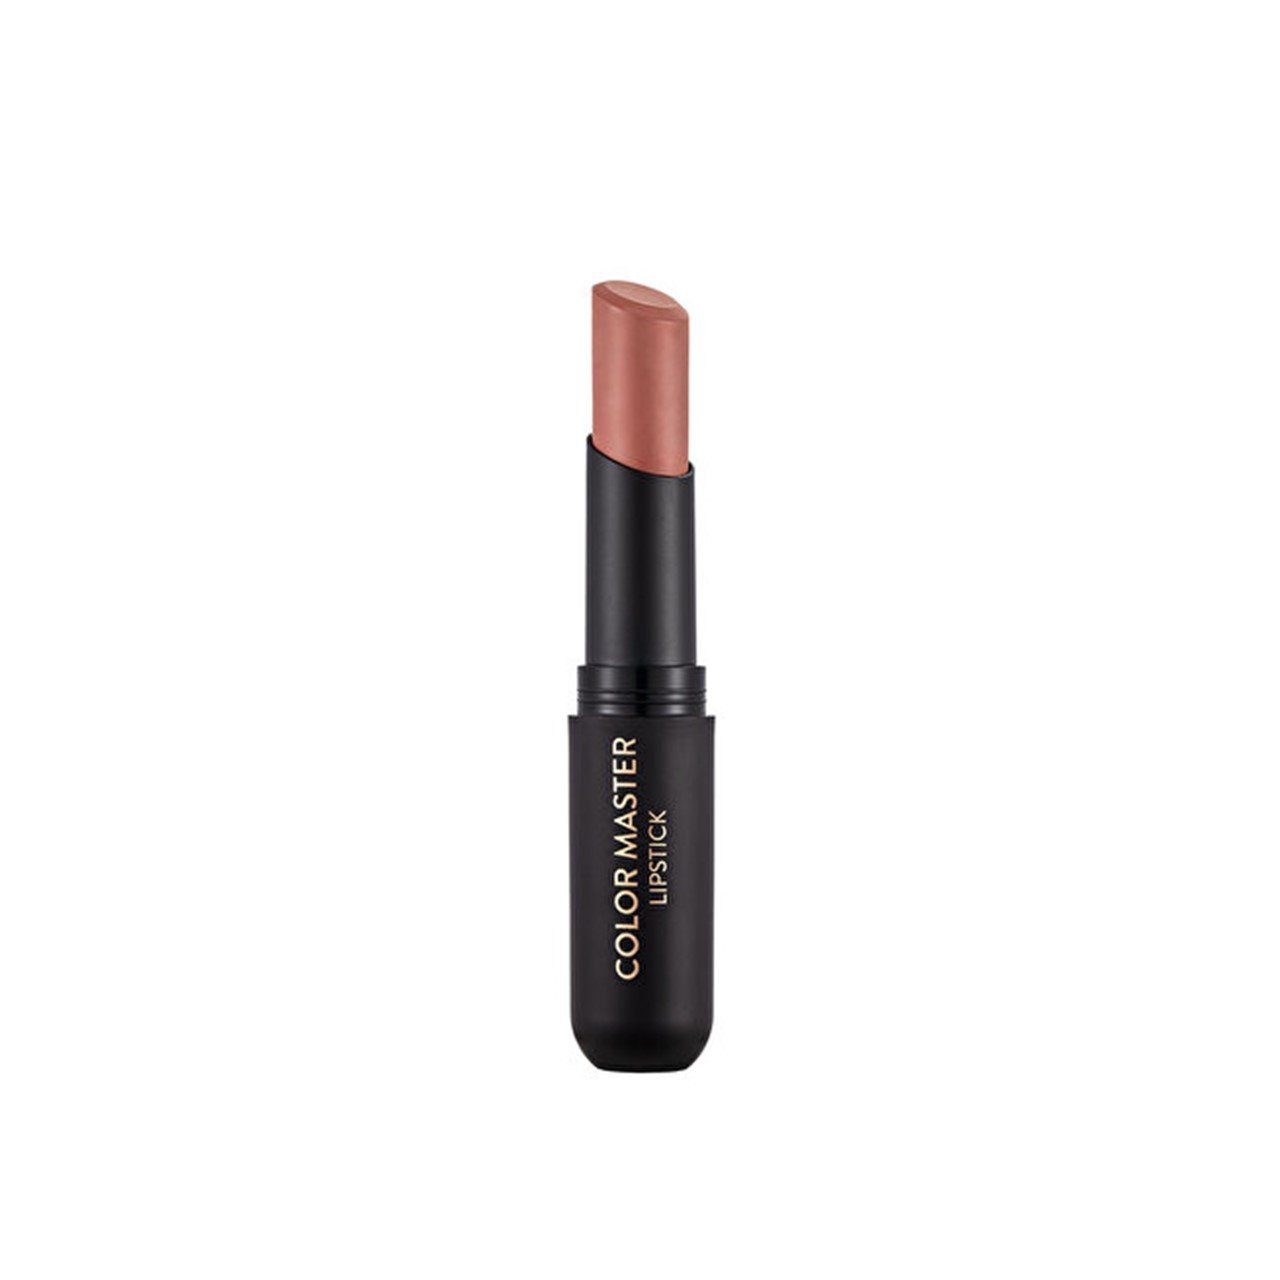 Flormar Color Master Lipstick 01 Nude In Town 3g (0.11oz)